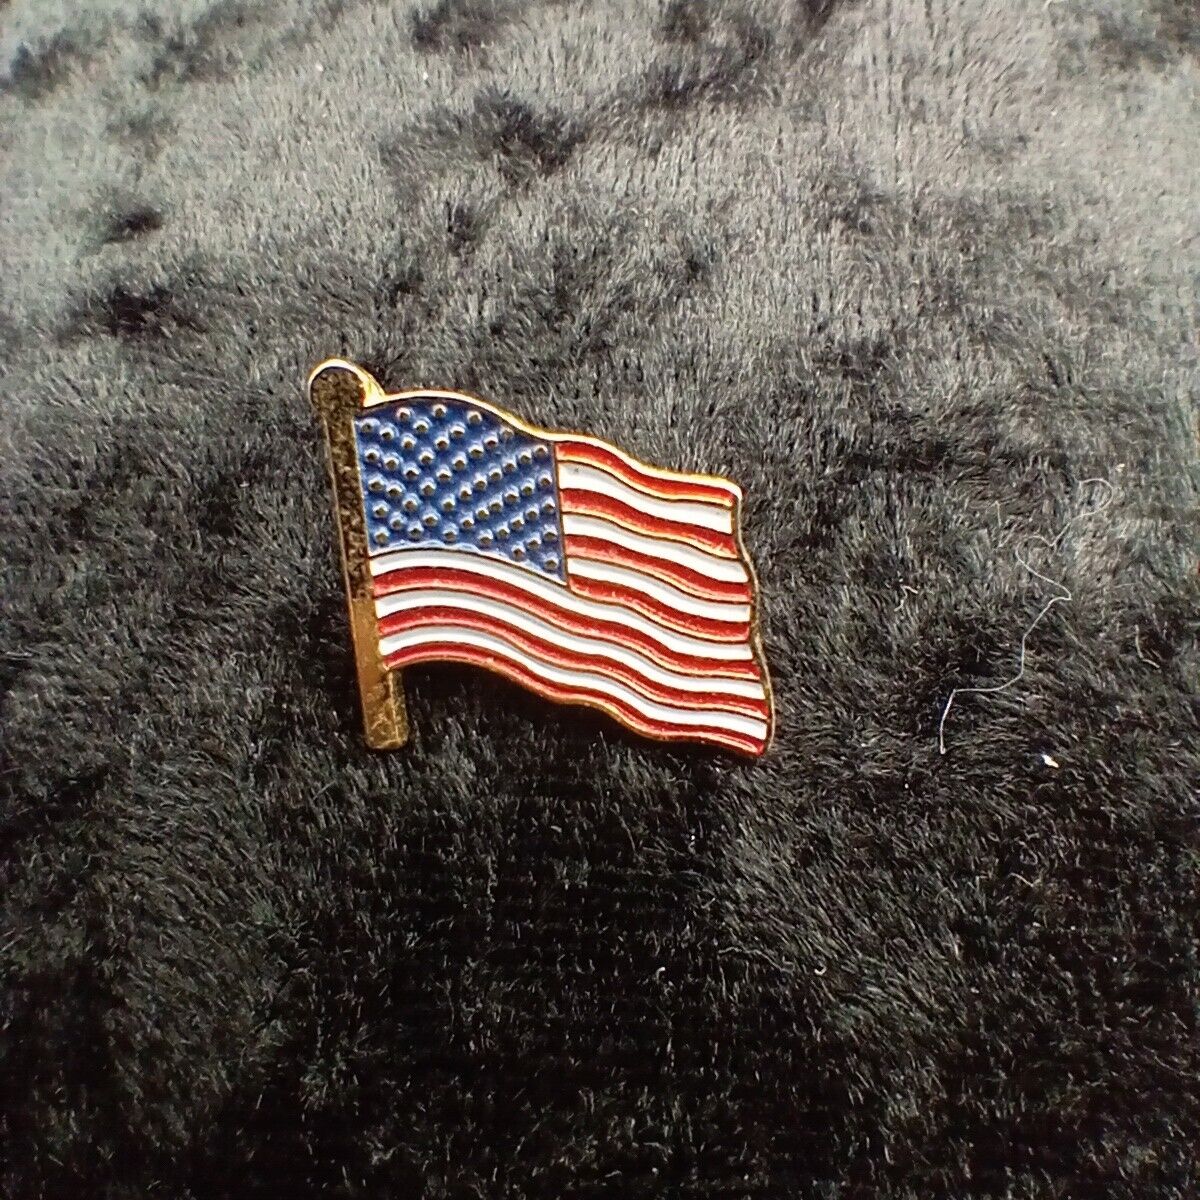 High Quality American Waving Flag Lapel Hat Pin Tie Tack Made In USA Scranton PA